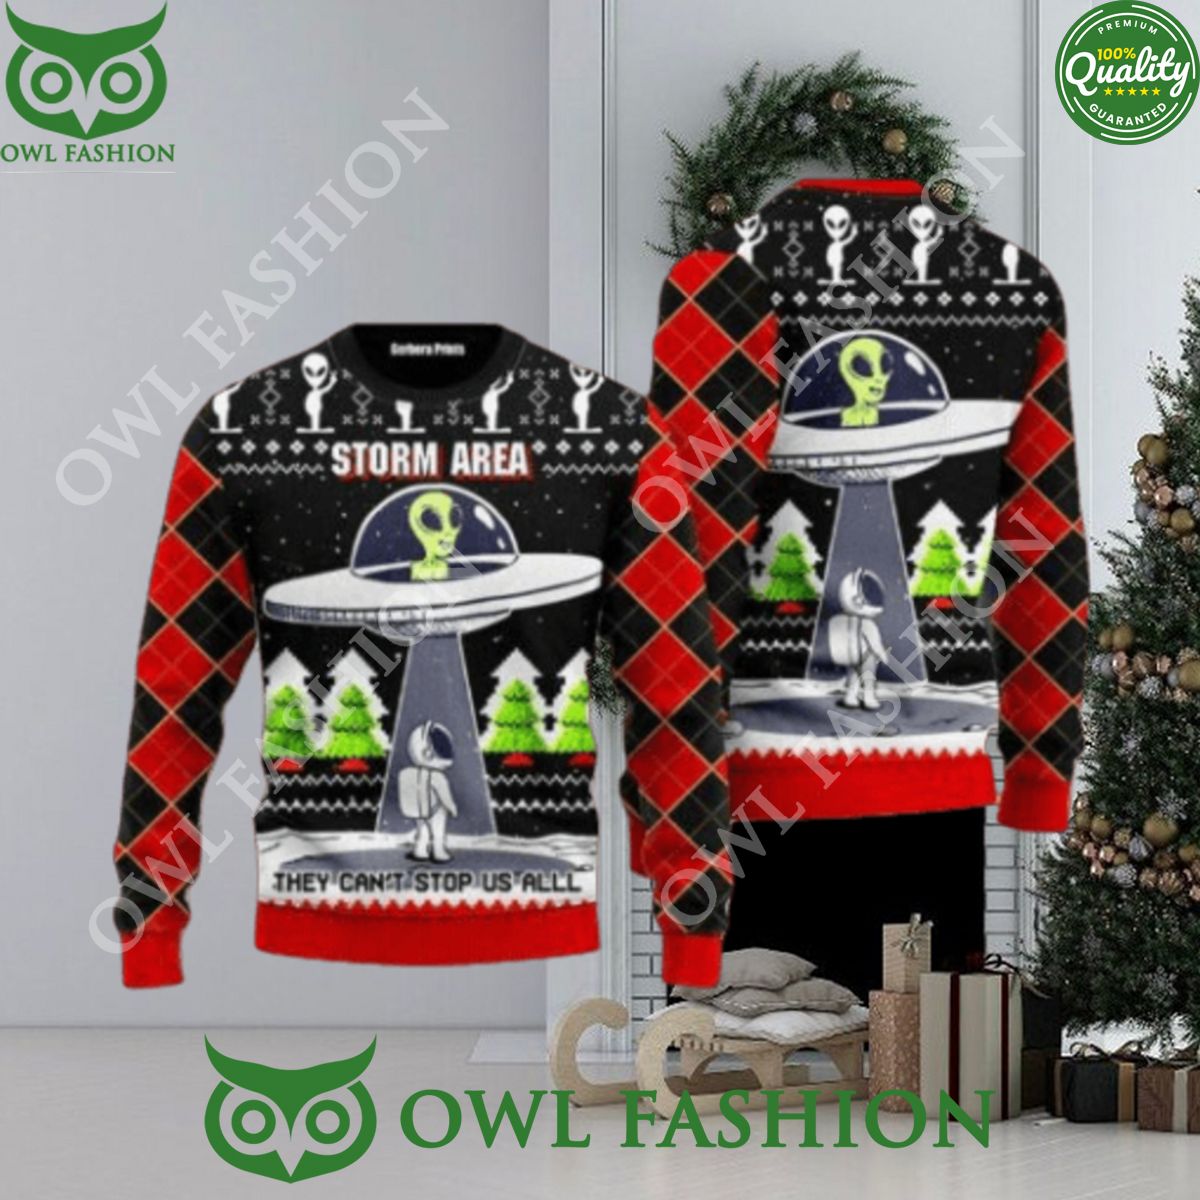 alien stop area ugly christmas sweater jumper 1 OUq5C.jpg